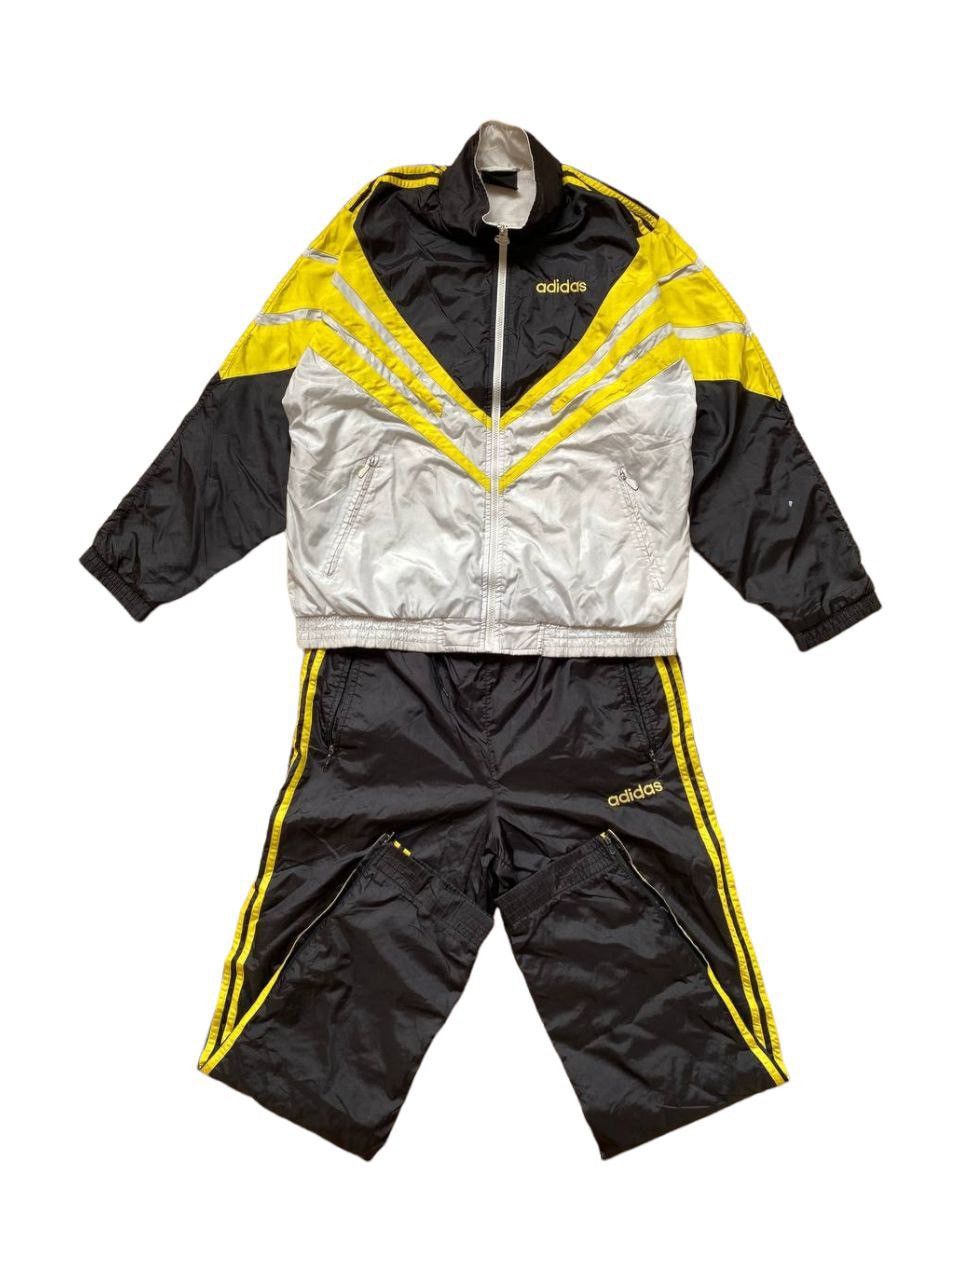 Pre-owned Adidas X Vintage Adidas Nylon Tracksuit Top + Pants In Black Yellow